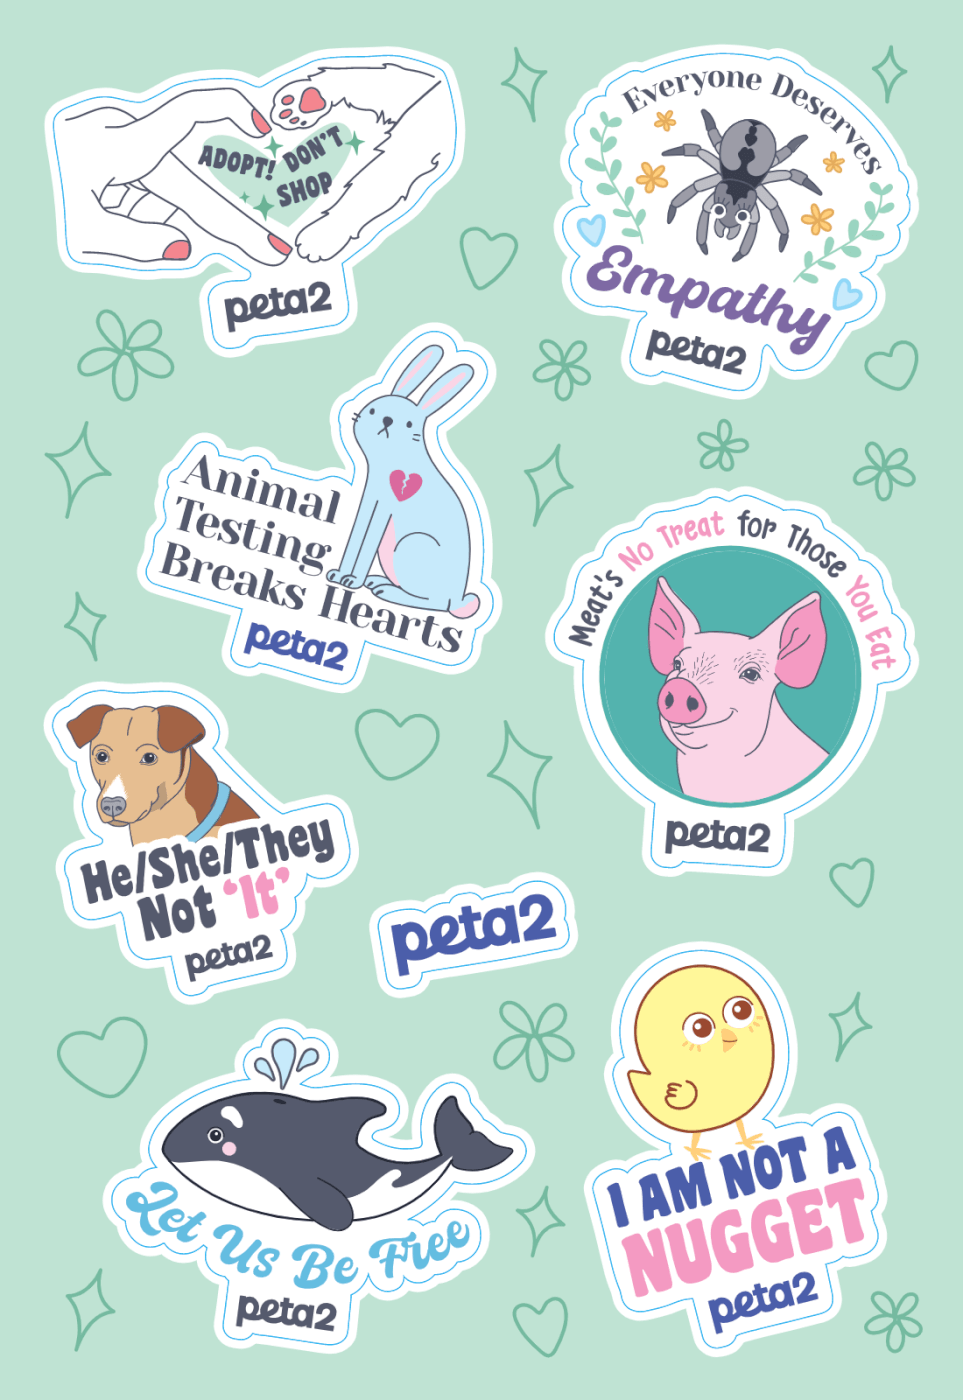 peta2 has a brand new sticker sheet, including the adorable "Not a Nugget" character